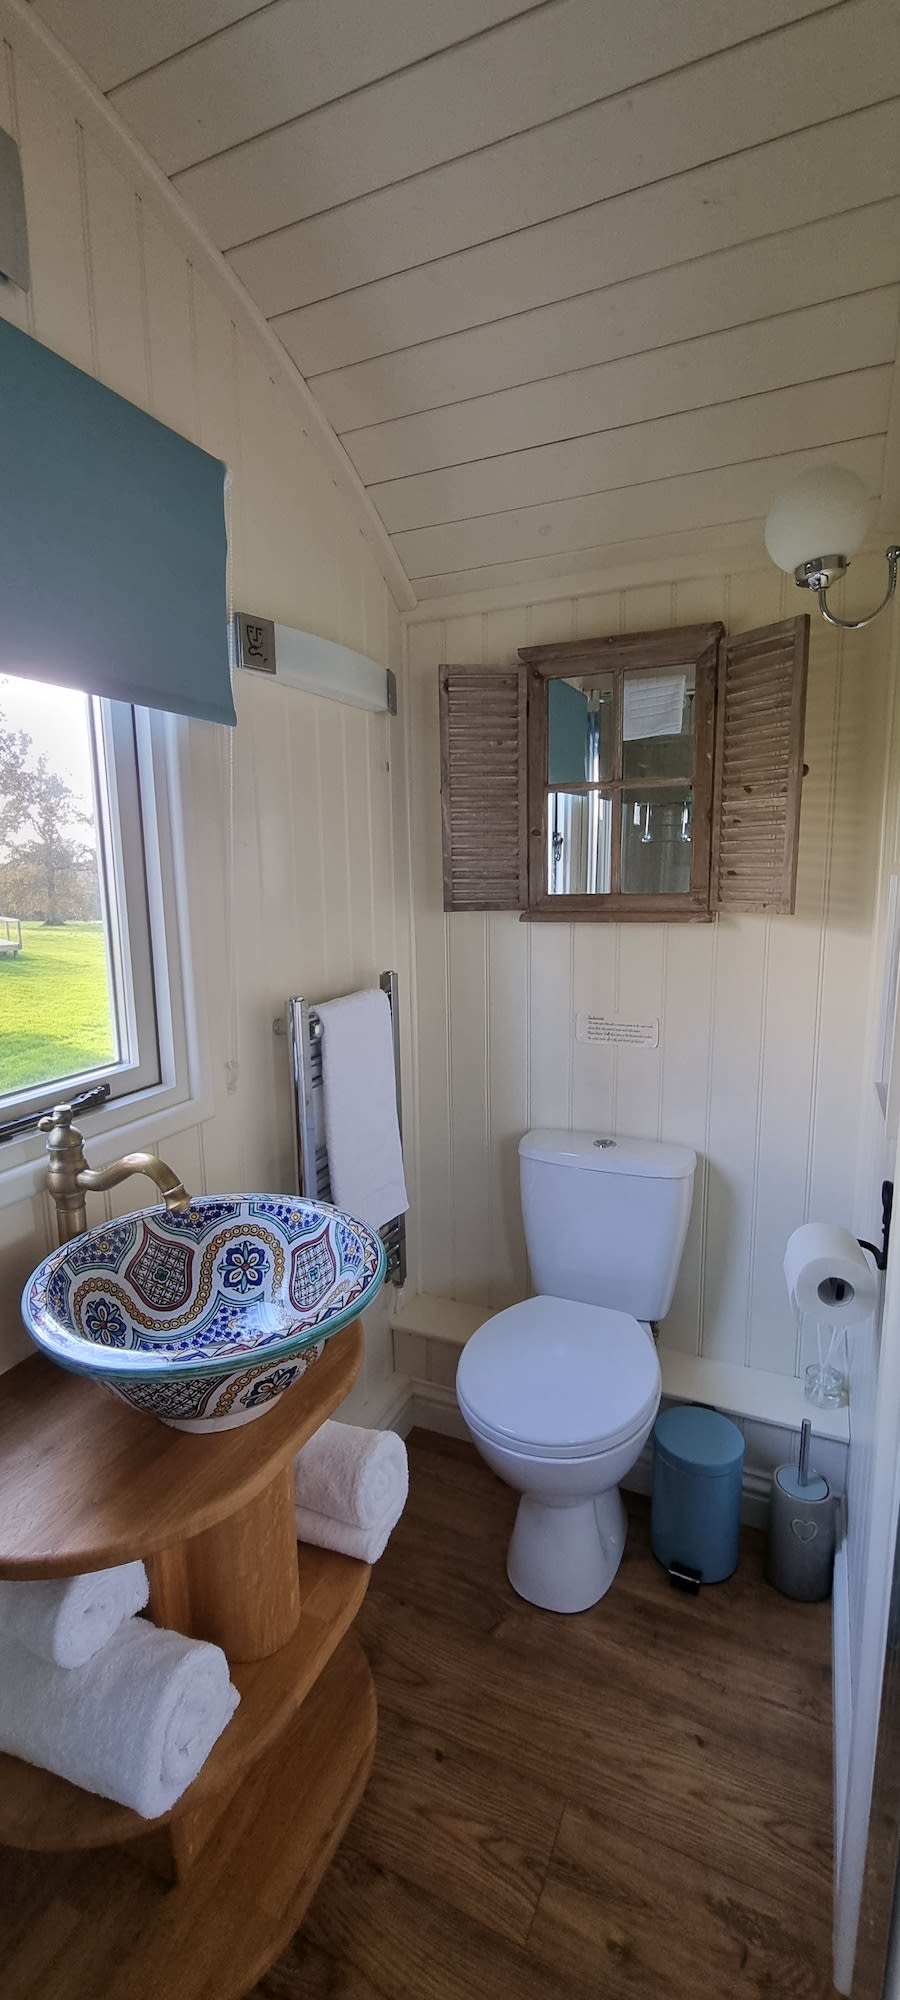 Mains supply water to both the bathroom basin and kitchen sink mean our water is drinking quality.  Fully flushing toilet and heated towel rail.